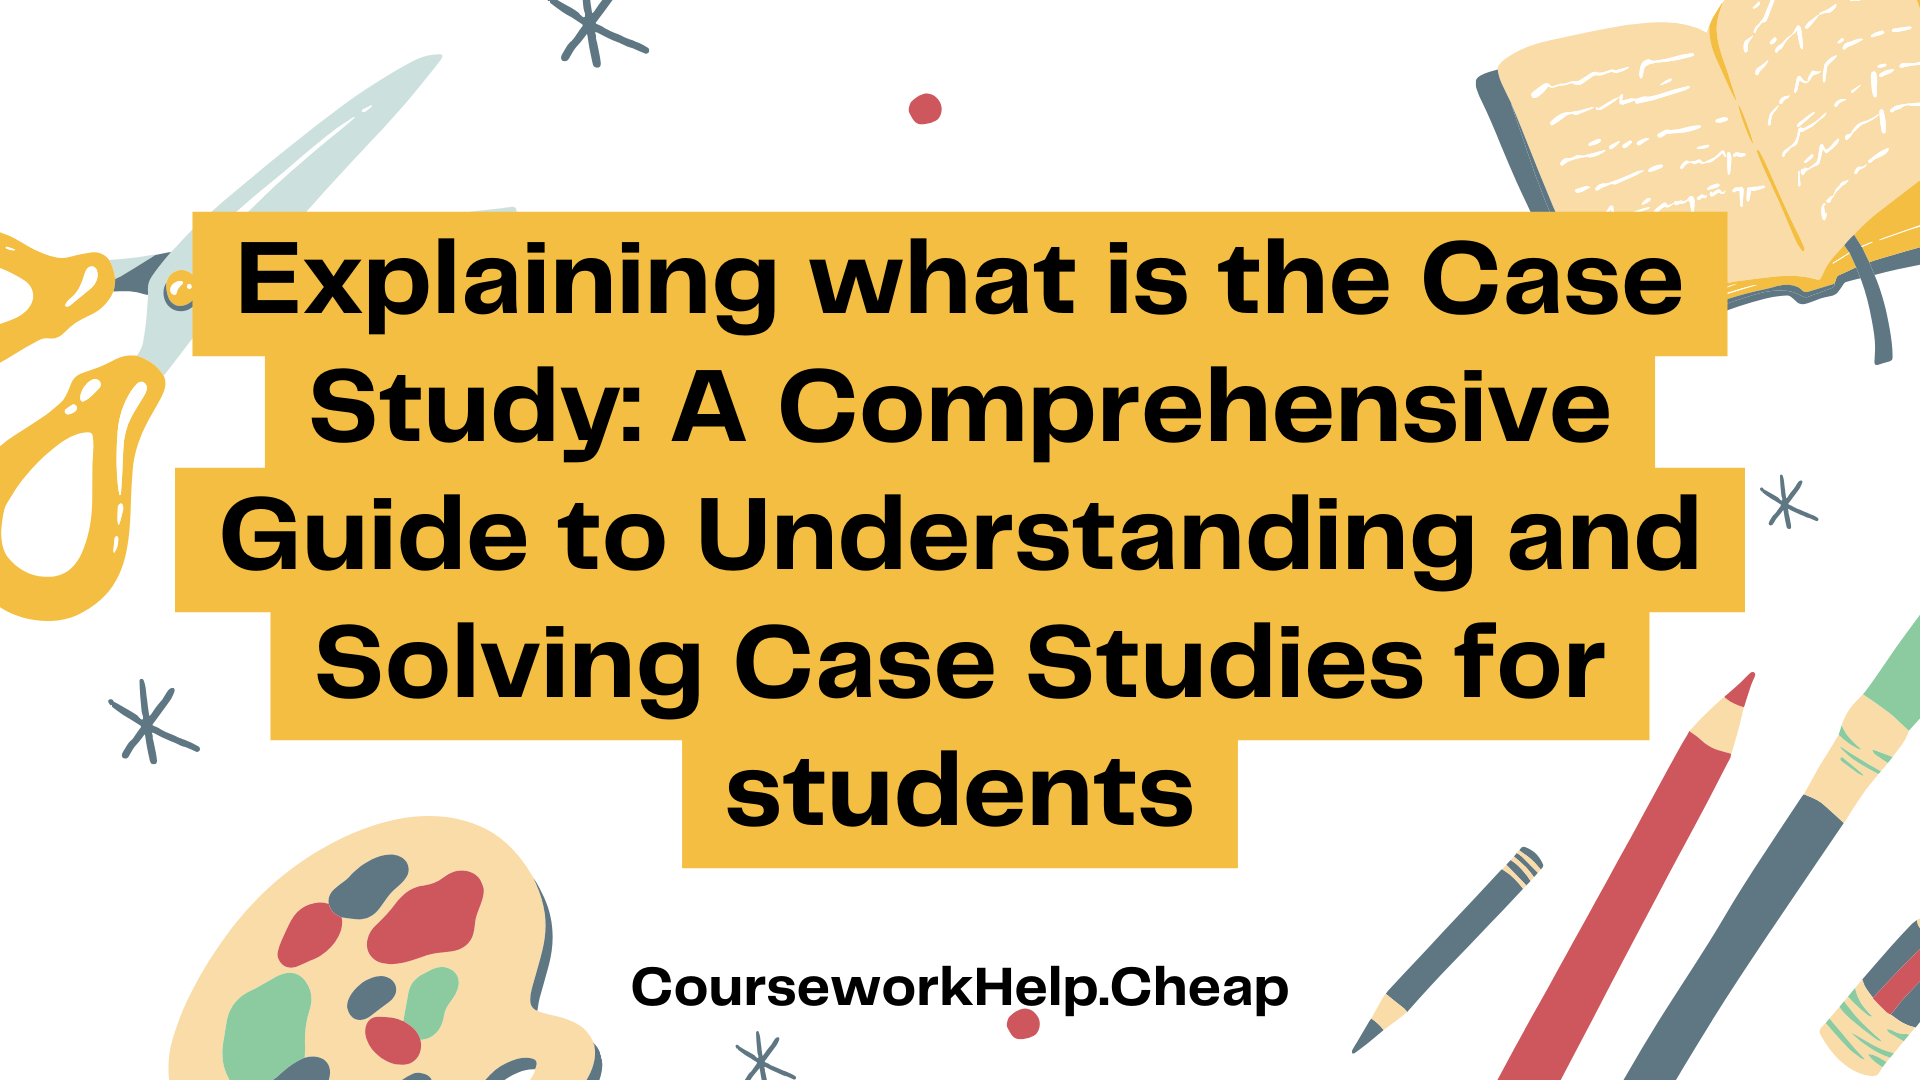 Explaining what is the Case Study: A Comprehensive Guide to Understanding and Solving Case Studies for students